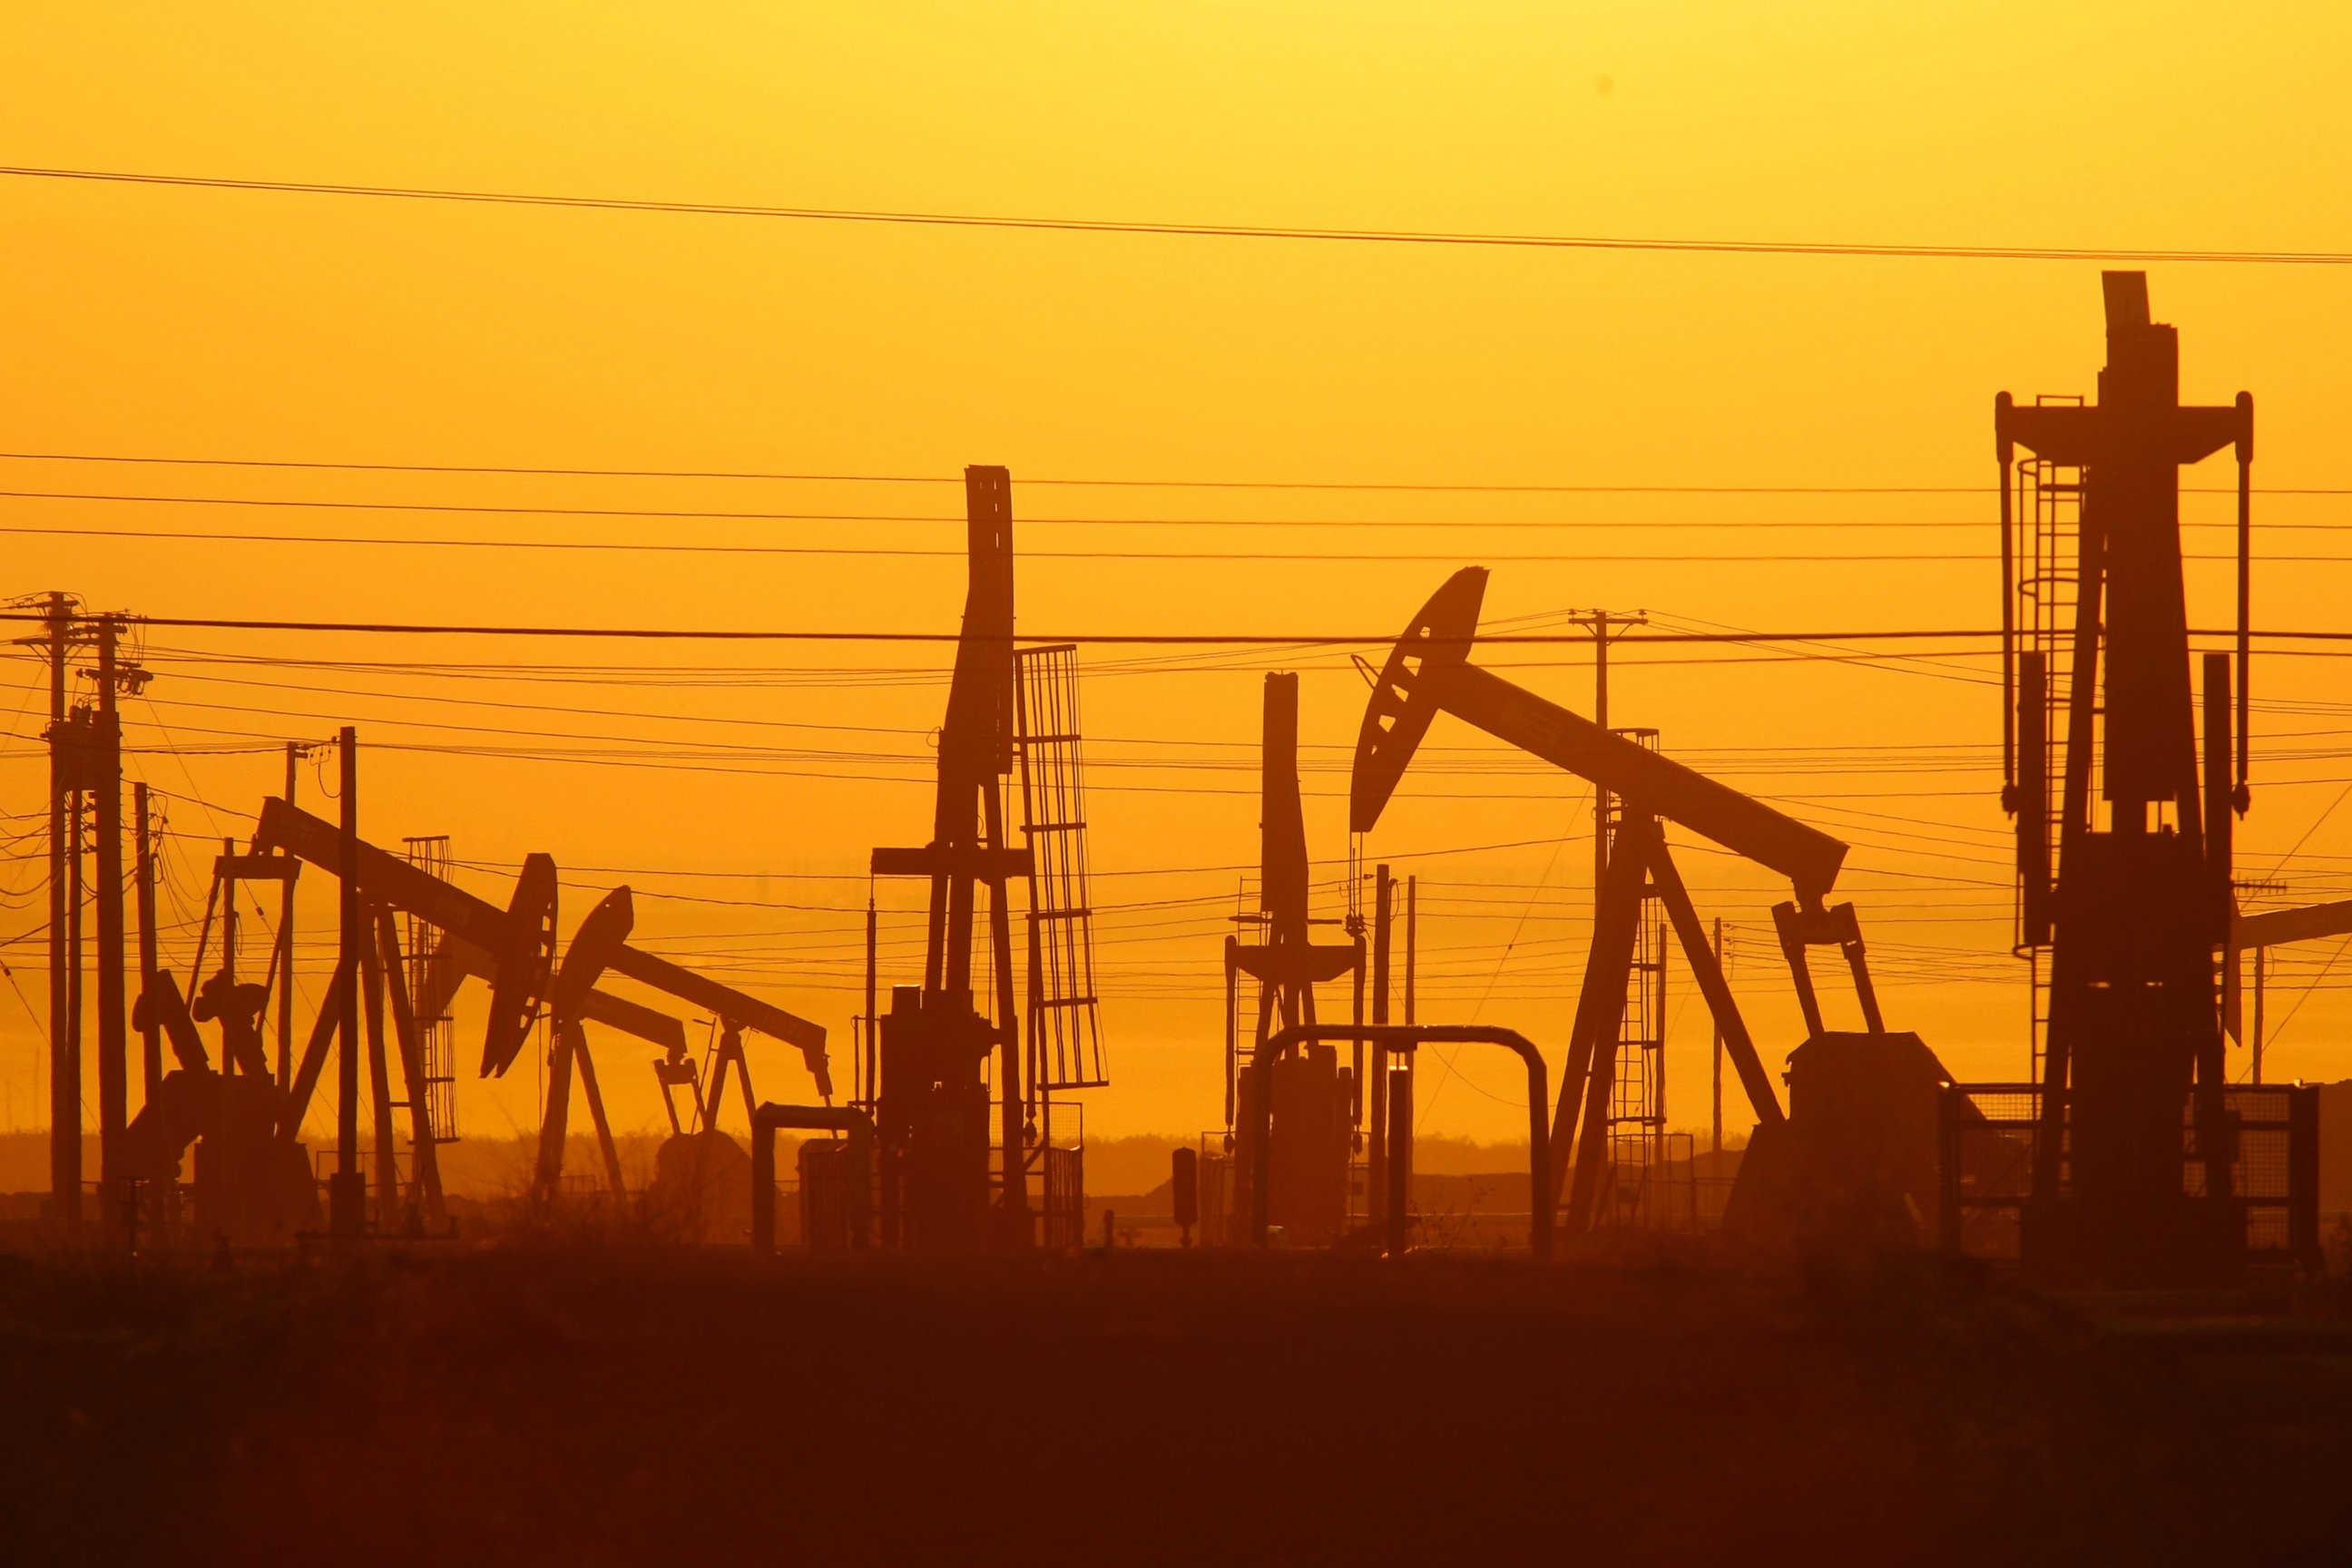 PHOTO: Pump jacks are seen at dawn in an oil field over the Monterey Shale formation where gas and oil extraction using hydraulic fracturing, or fracking, is on the verge of a boom on March 24, 2014 near Lost Hills, Calif.